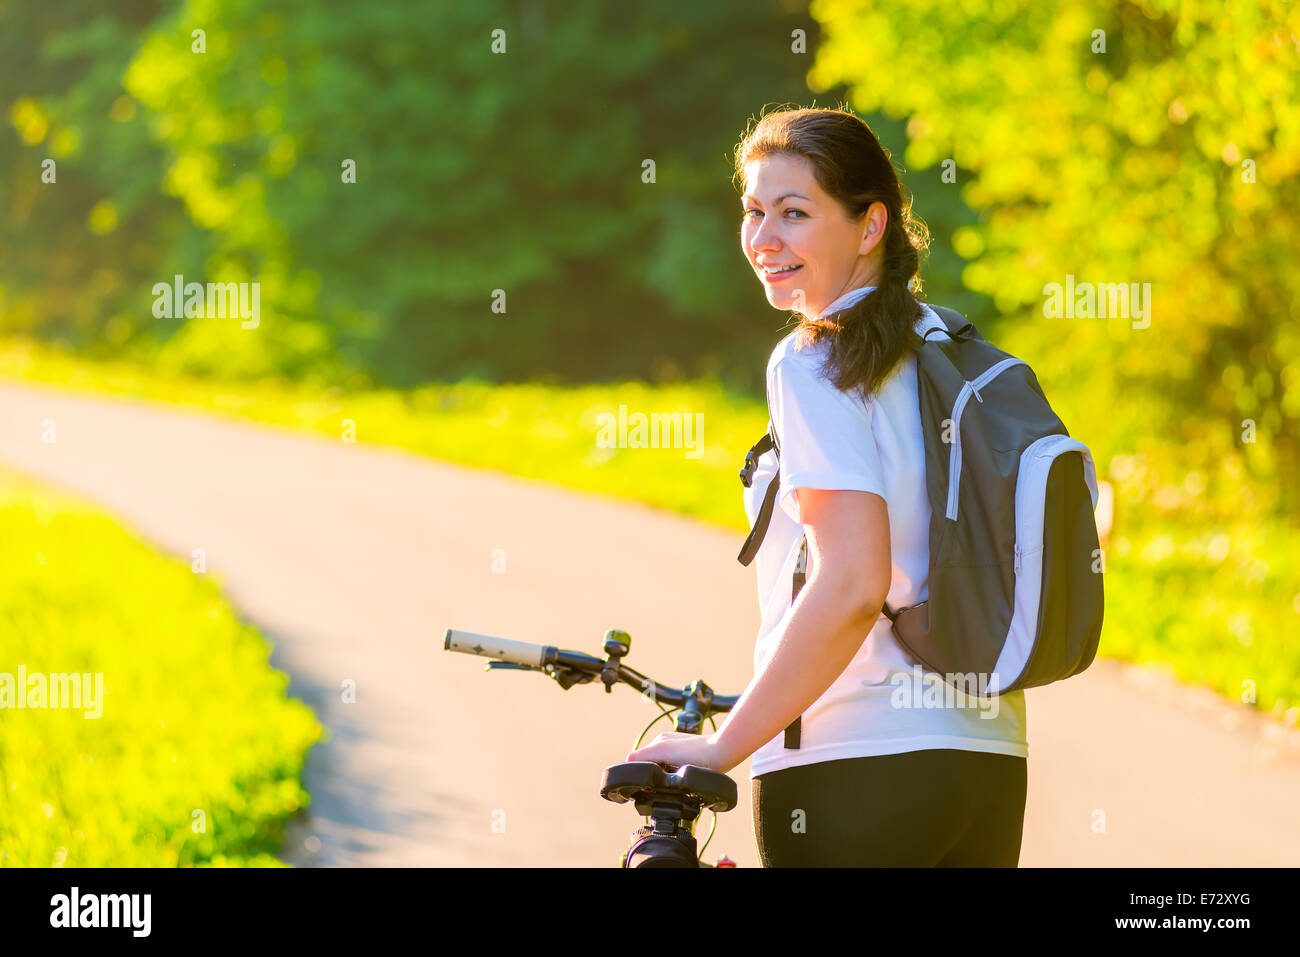 Brunette rides a bicycle on a sunny morning Stock Photo